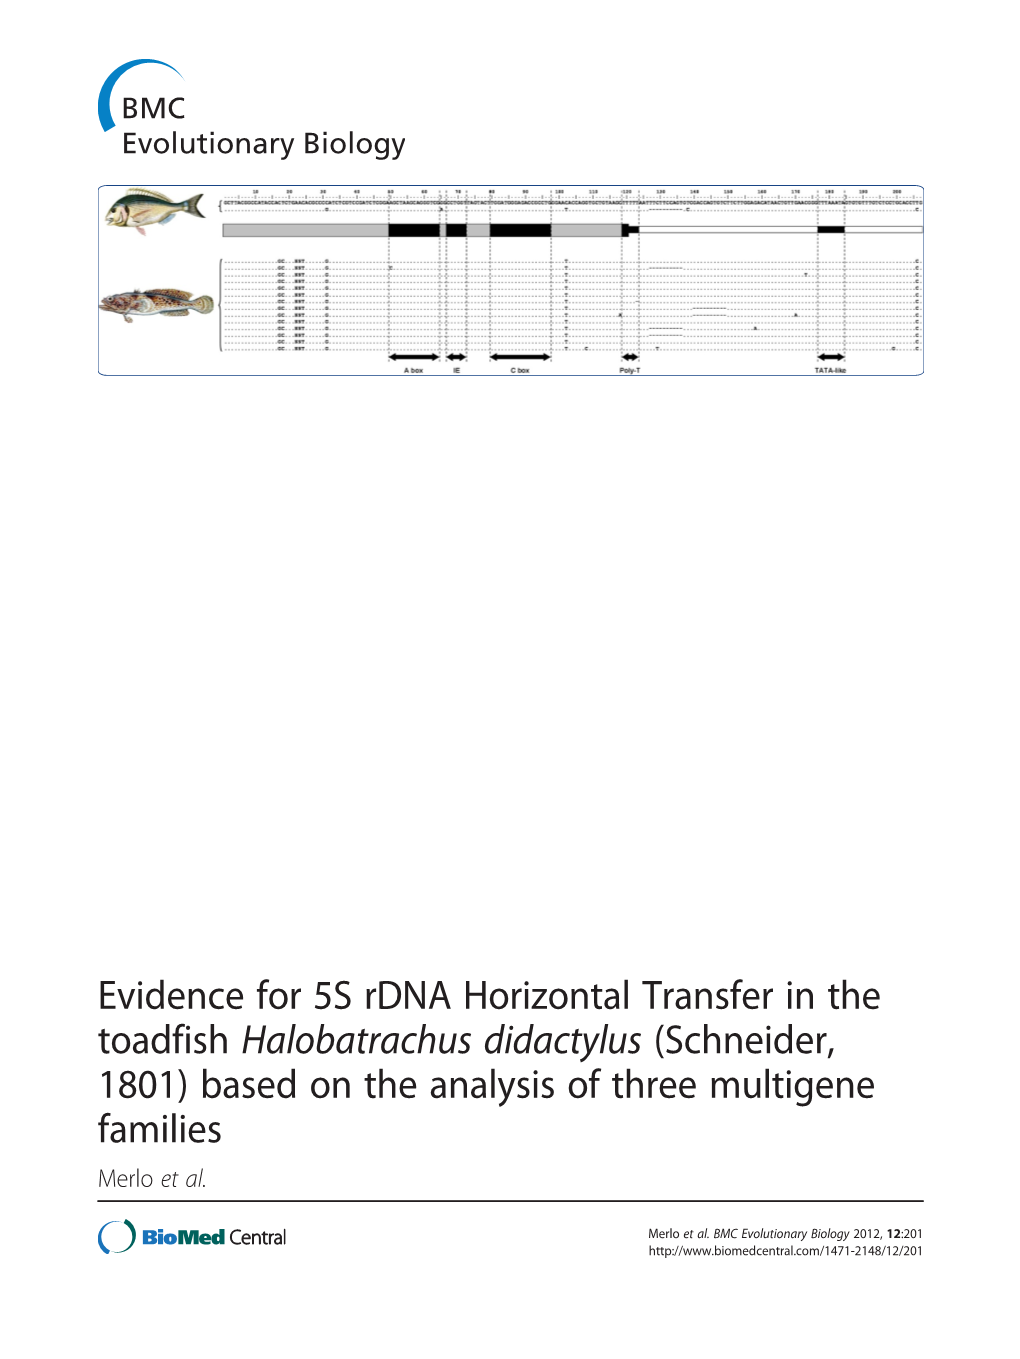 Evidence for 5S Rdna Horizontal Transfer in the Toadfish Halobatrachus Didactylus (Schneider, 1801) Based on the Analysis of Three Multigene Families Merlo Et Al